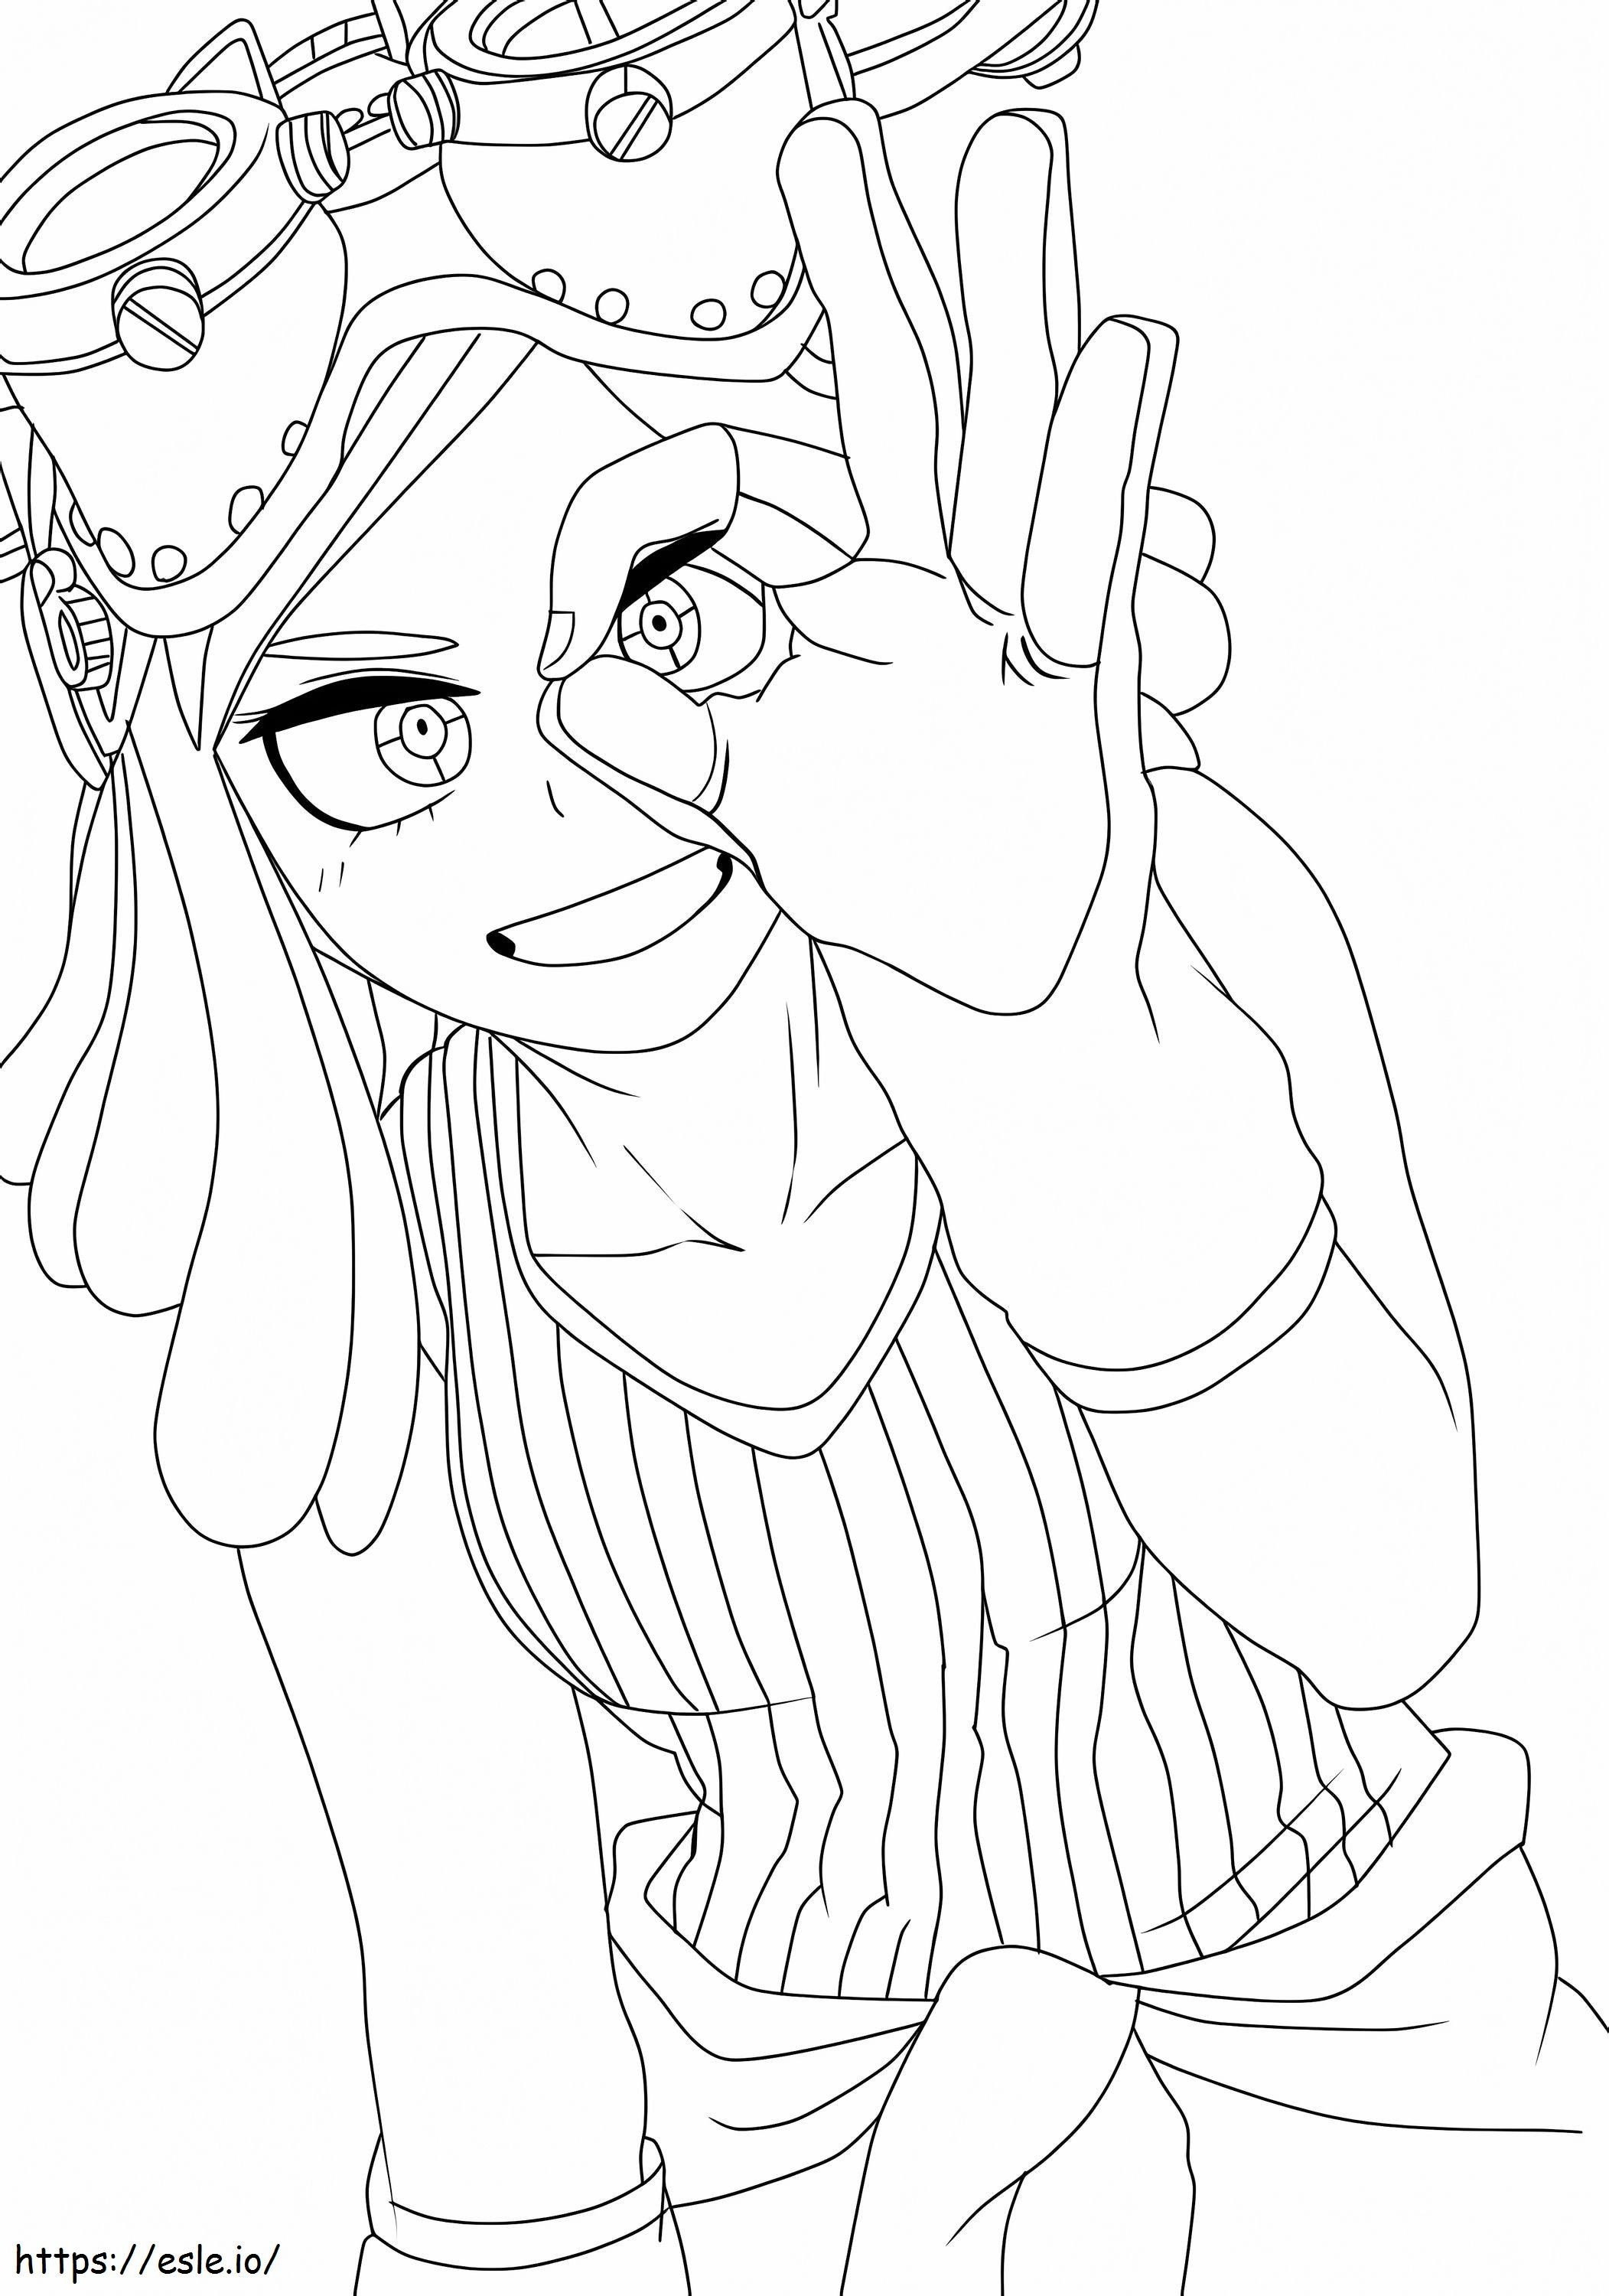 Anime Girl Mei Hatsume coloring page